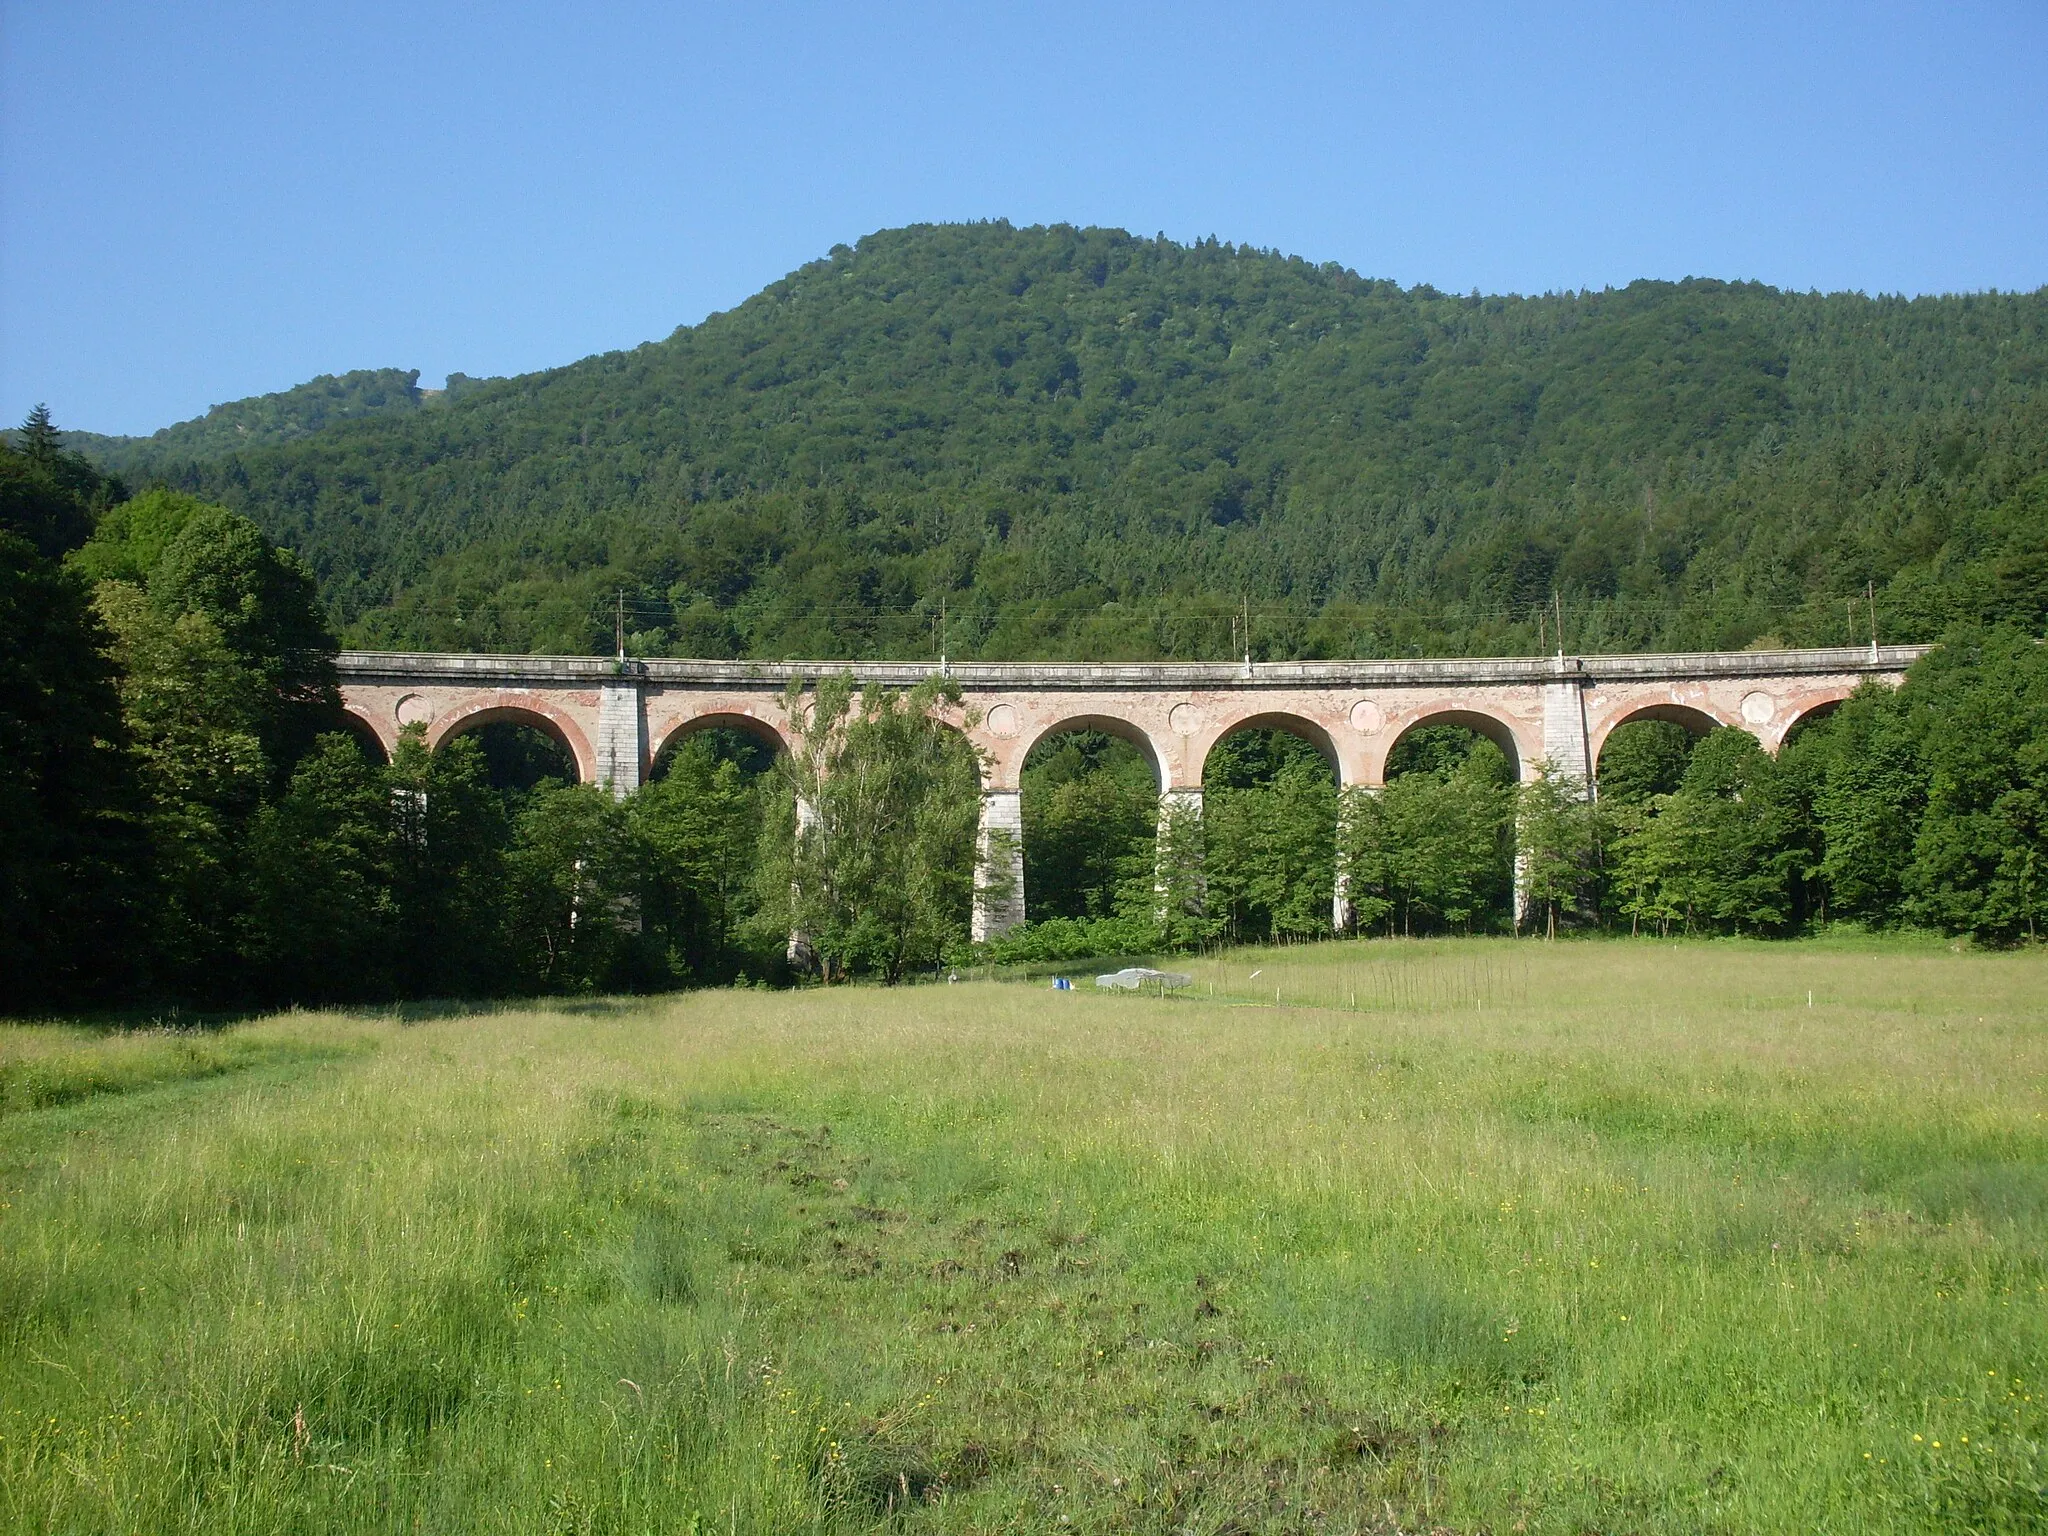 Photo showing: North-eastern side of the railway viaduct, called Dolinski most or Jelenov viadukt or Hirschthaler Viadukt in German (meeaning Deervalley viaduct), near Borovnica, Slovenia. The viaduct was built in 1856 and is still in use today.